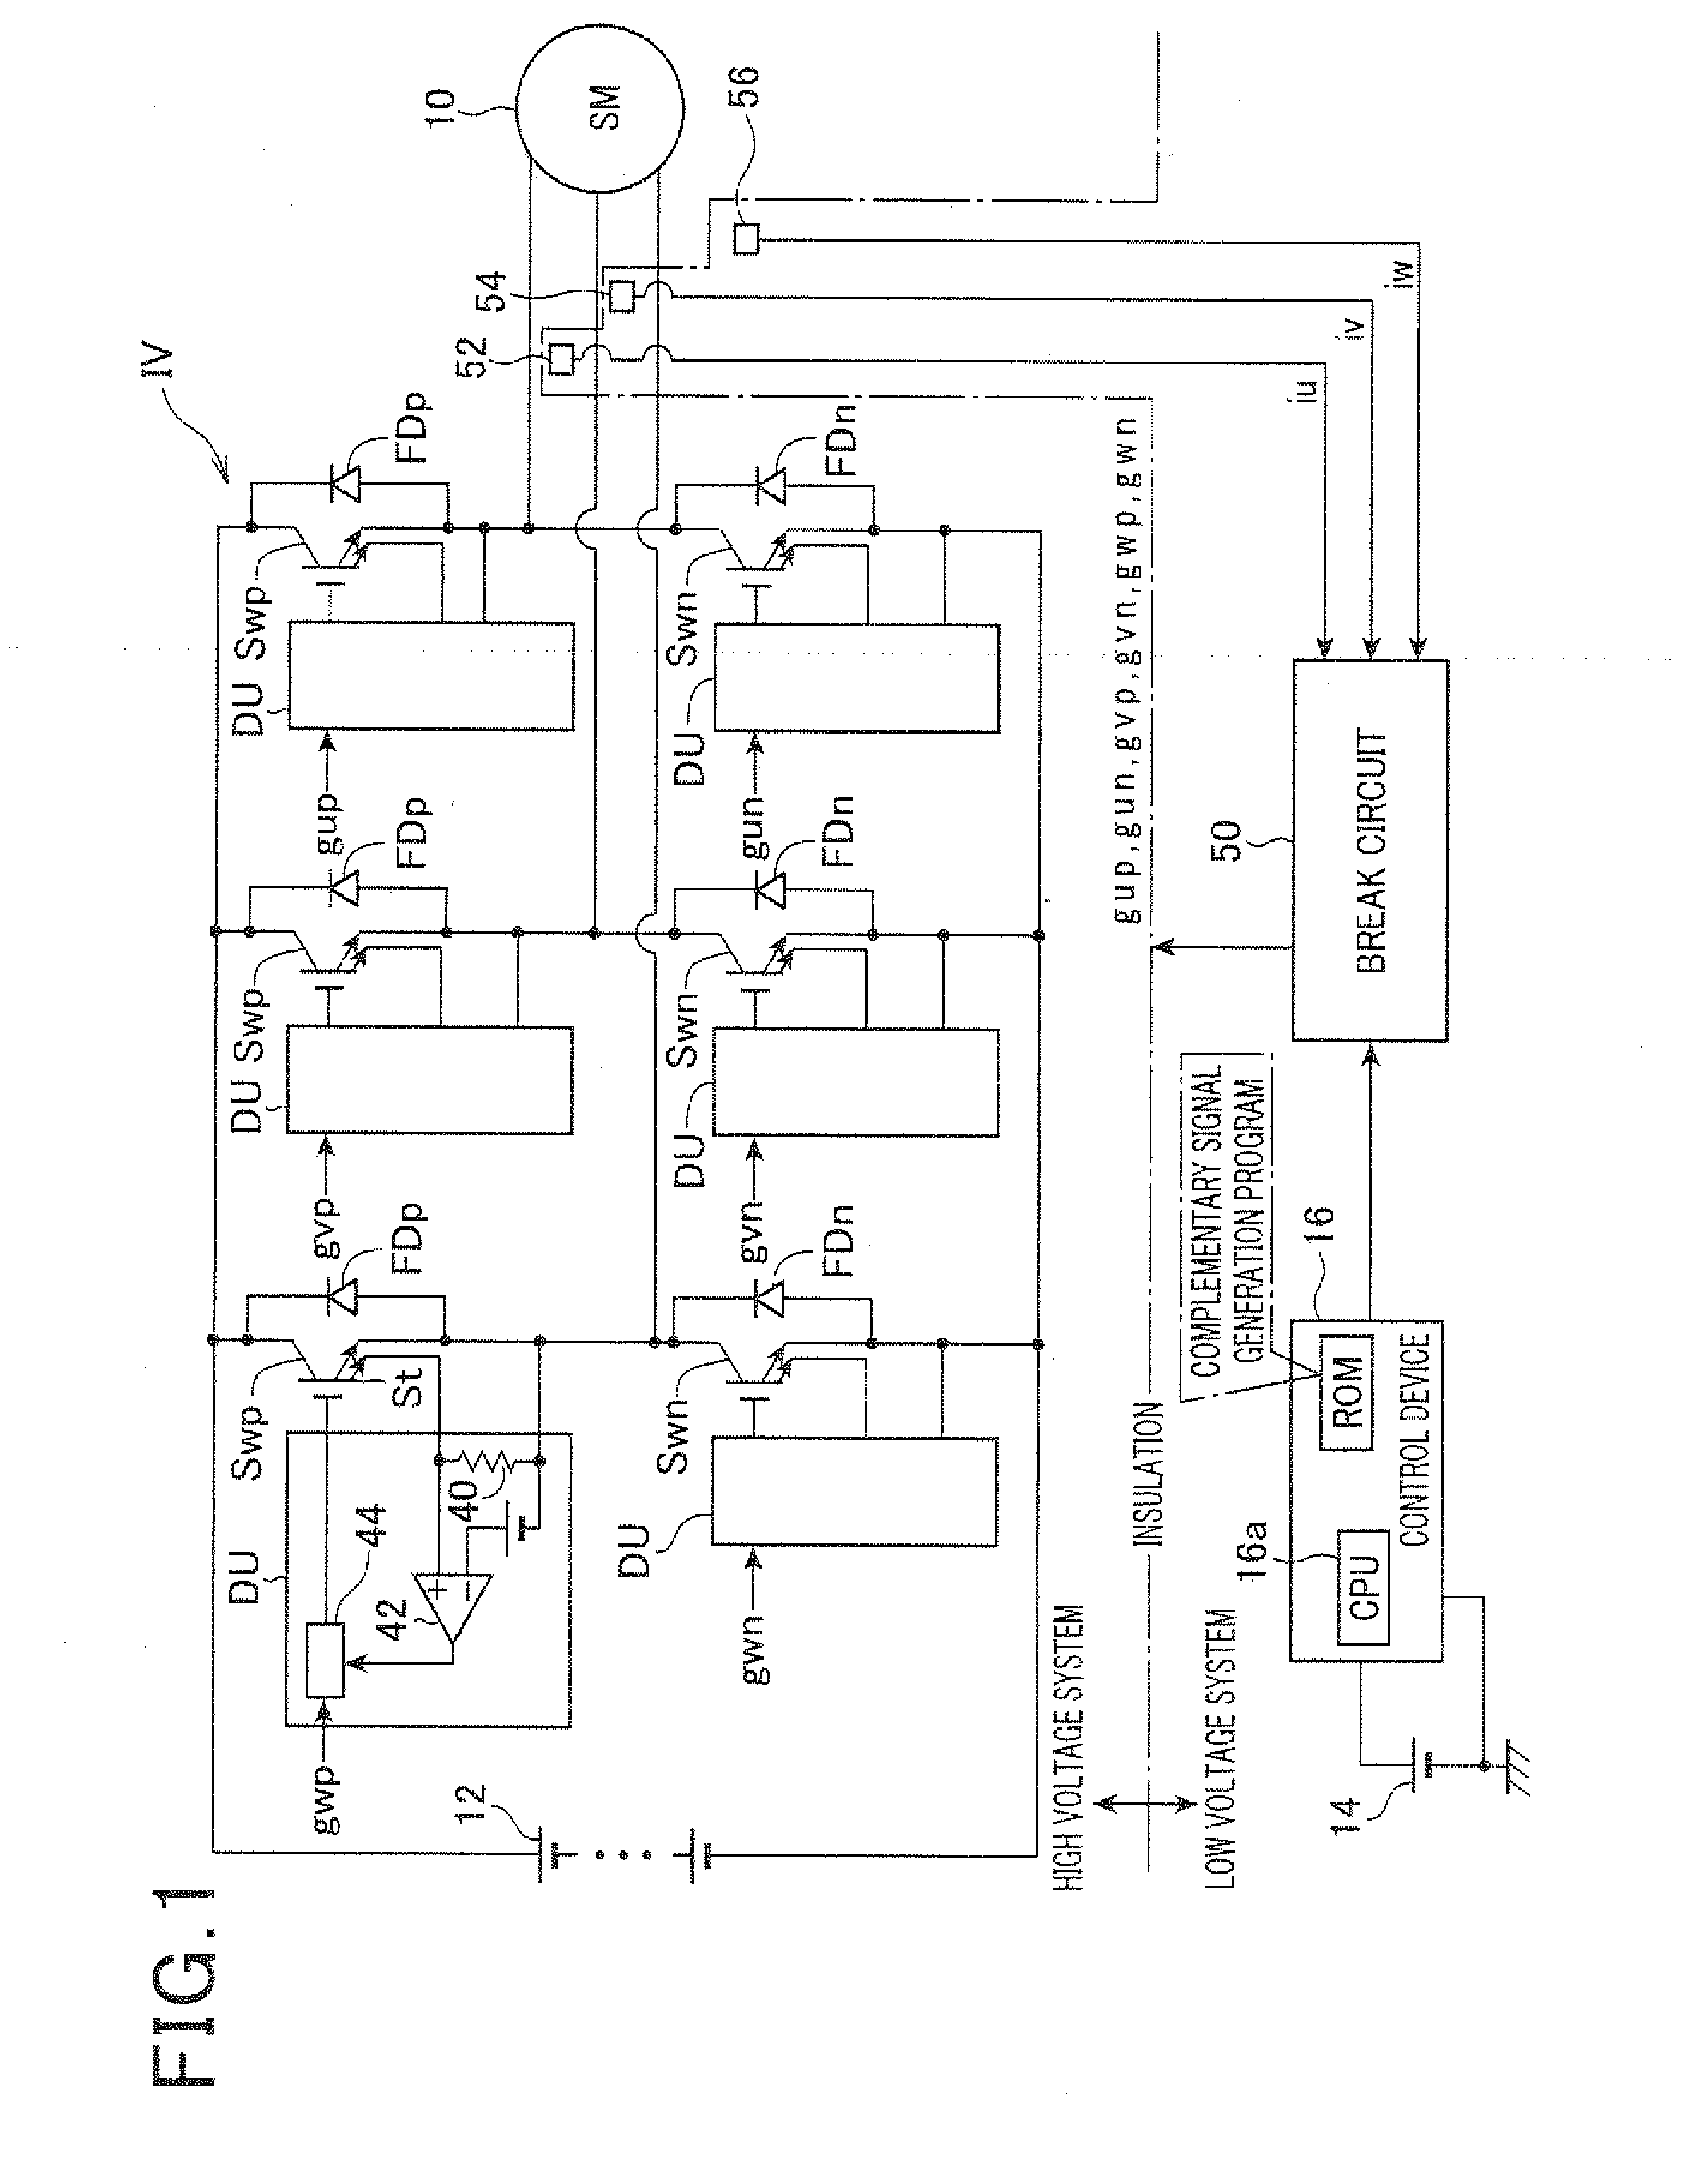 Drive device for electric power conversion circuit